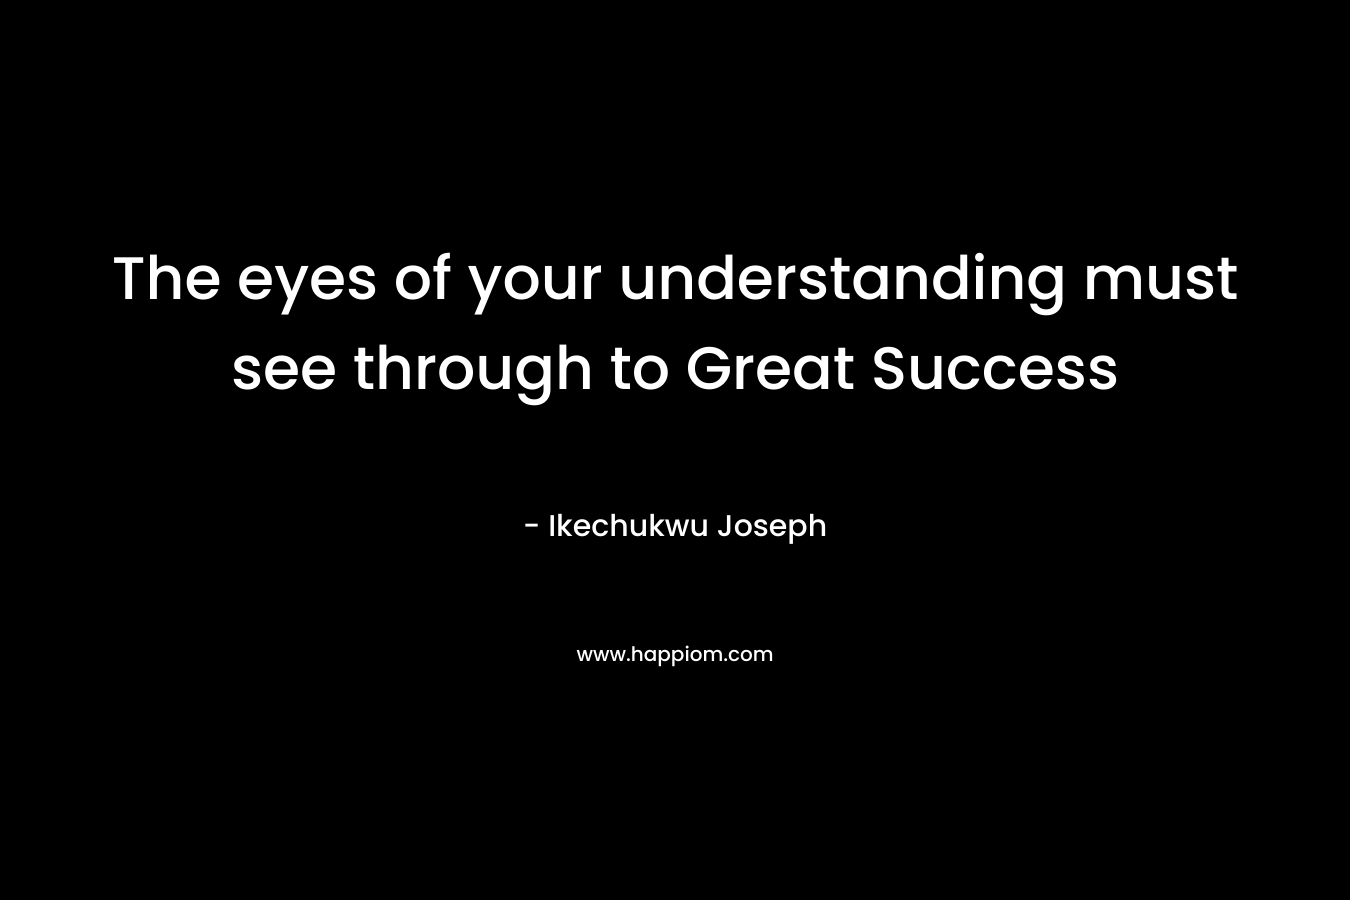 The eyes of your understanding must see through to Great Success